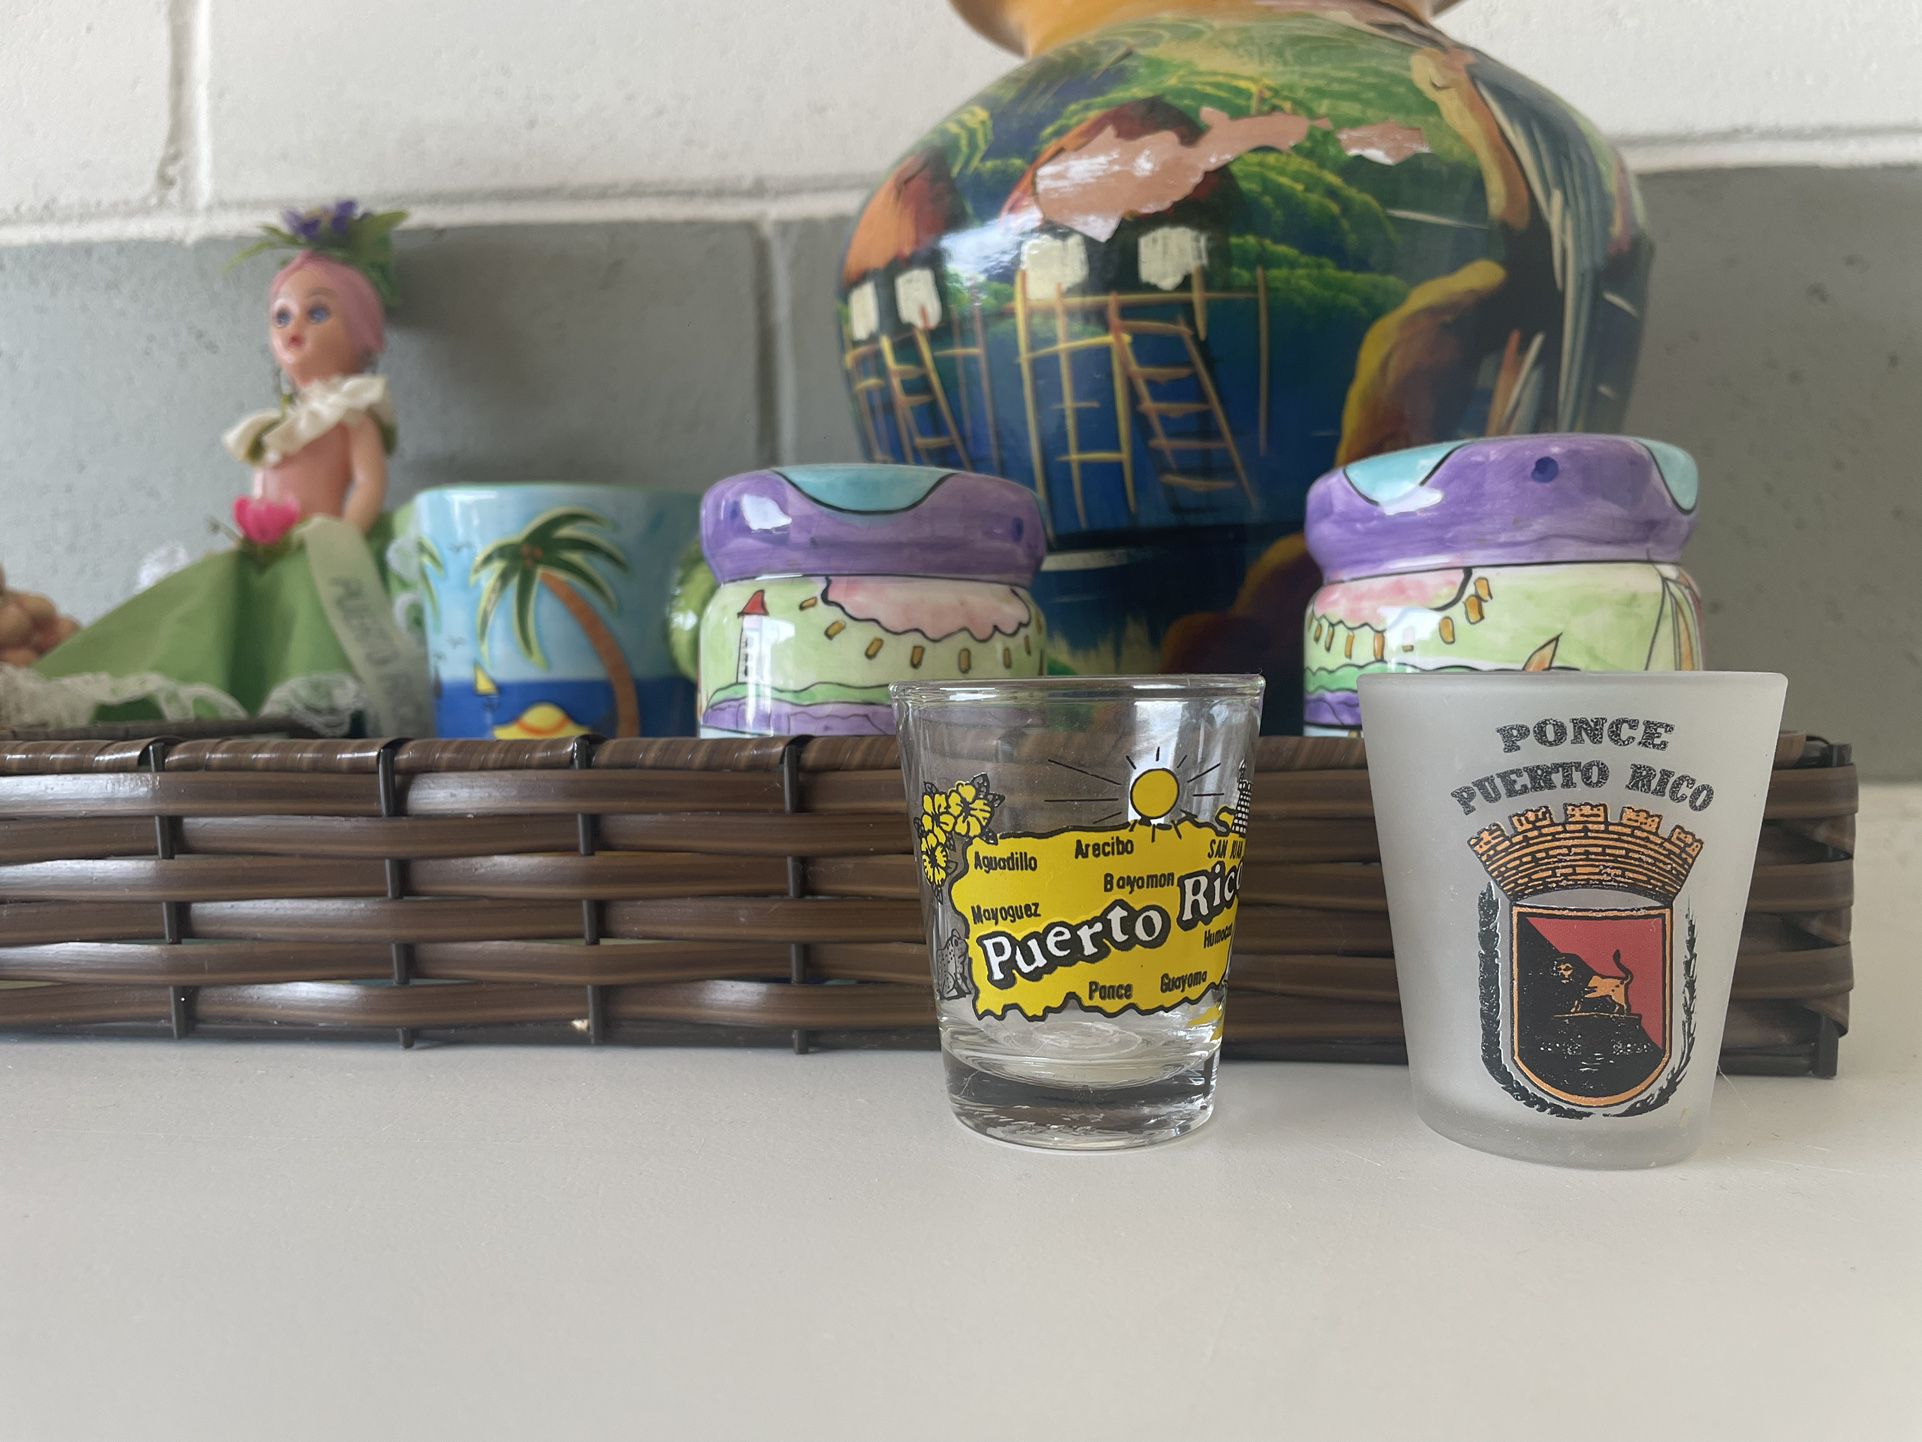 Souvenirs from Puerto Rico